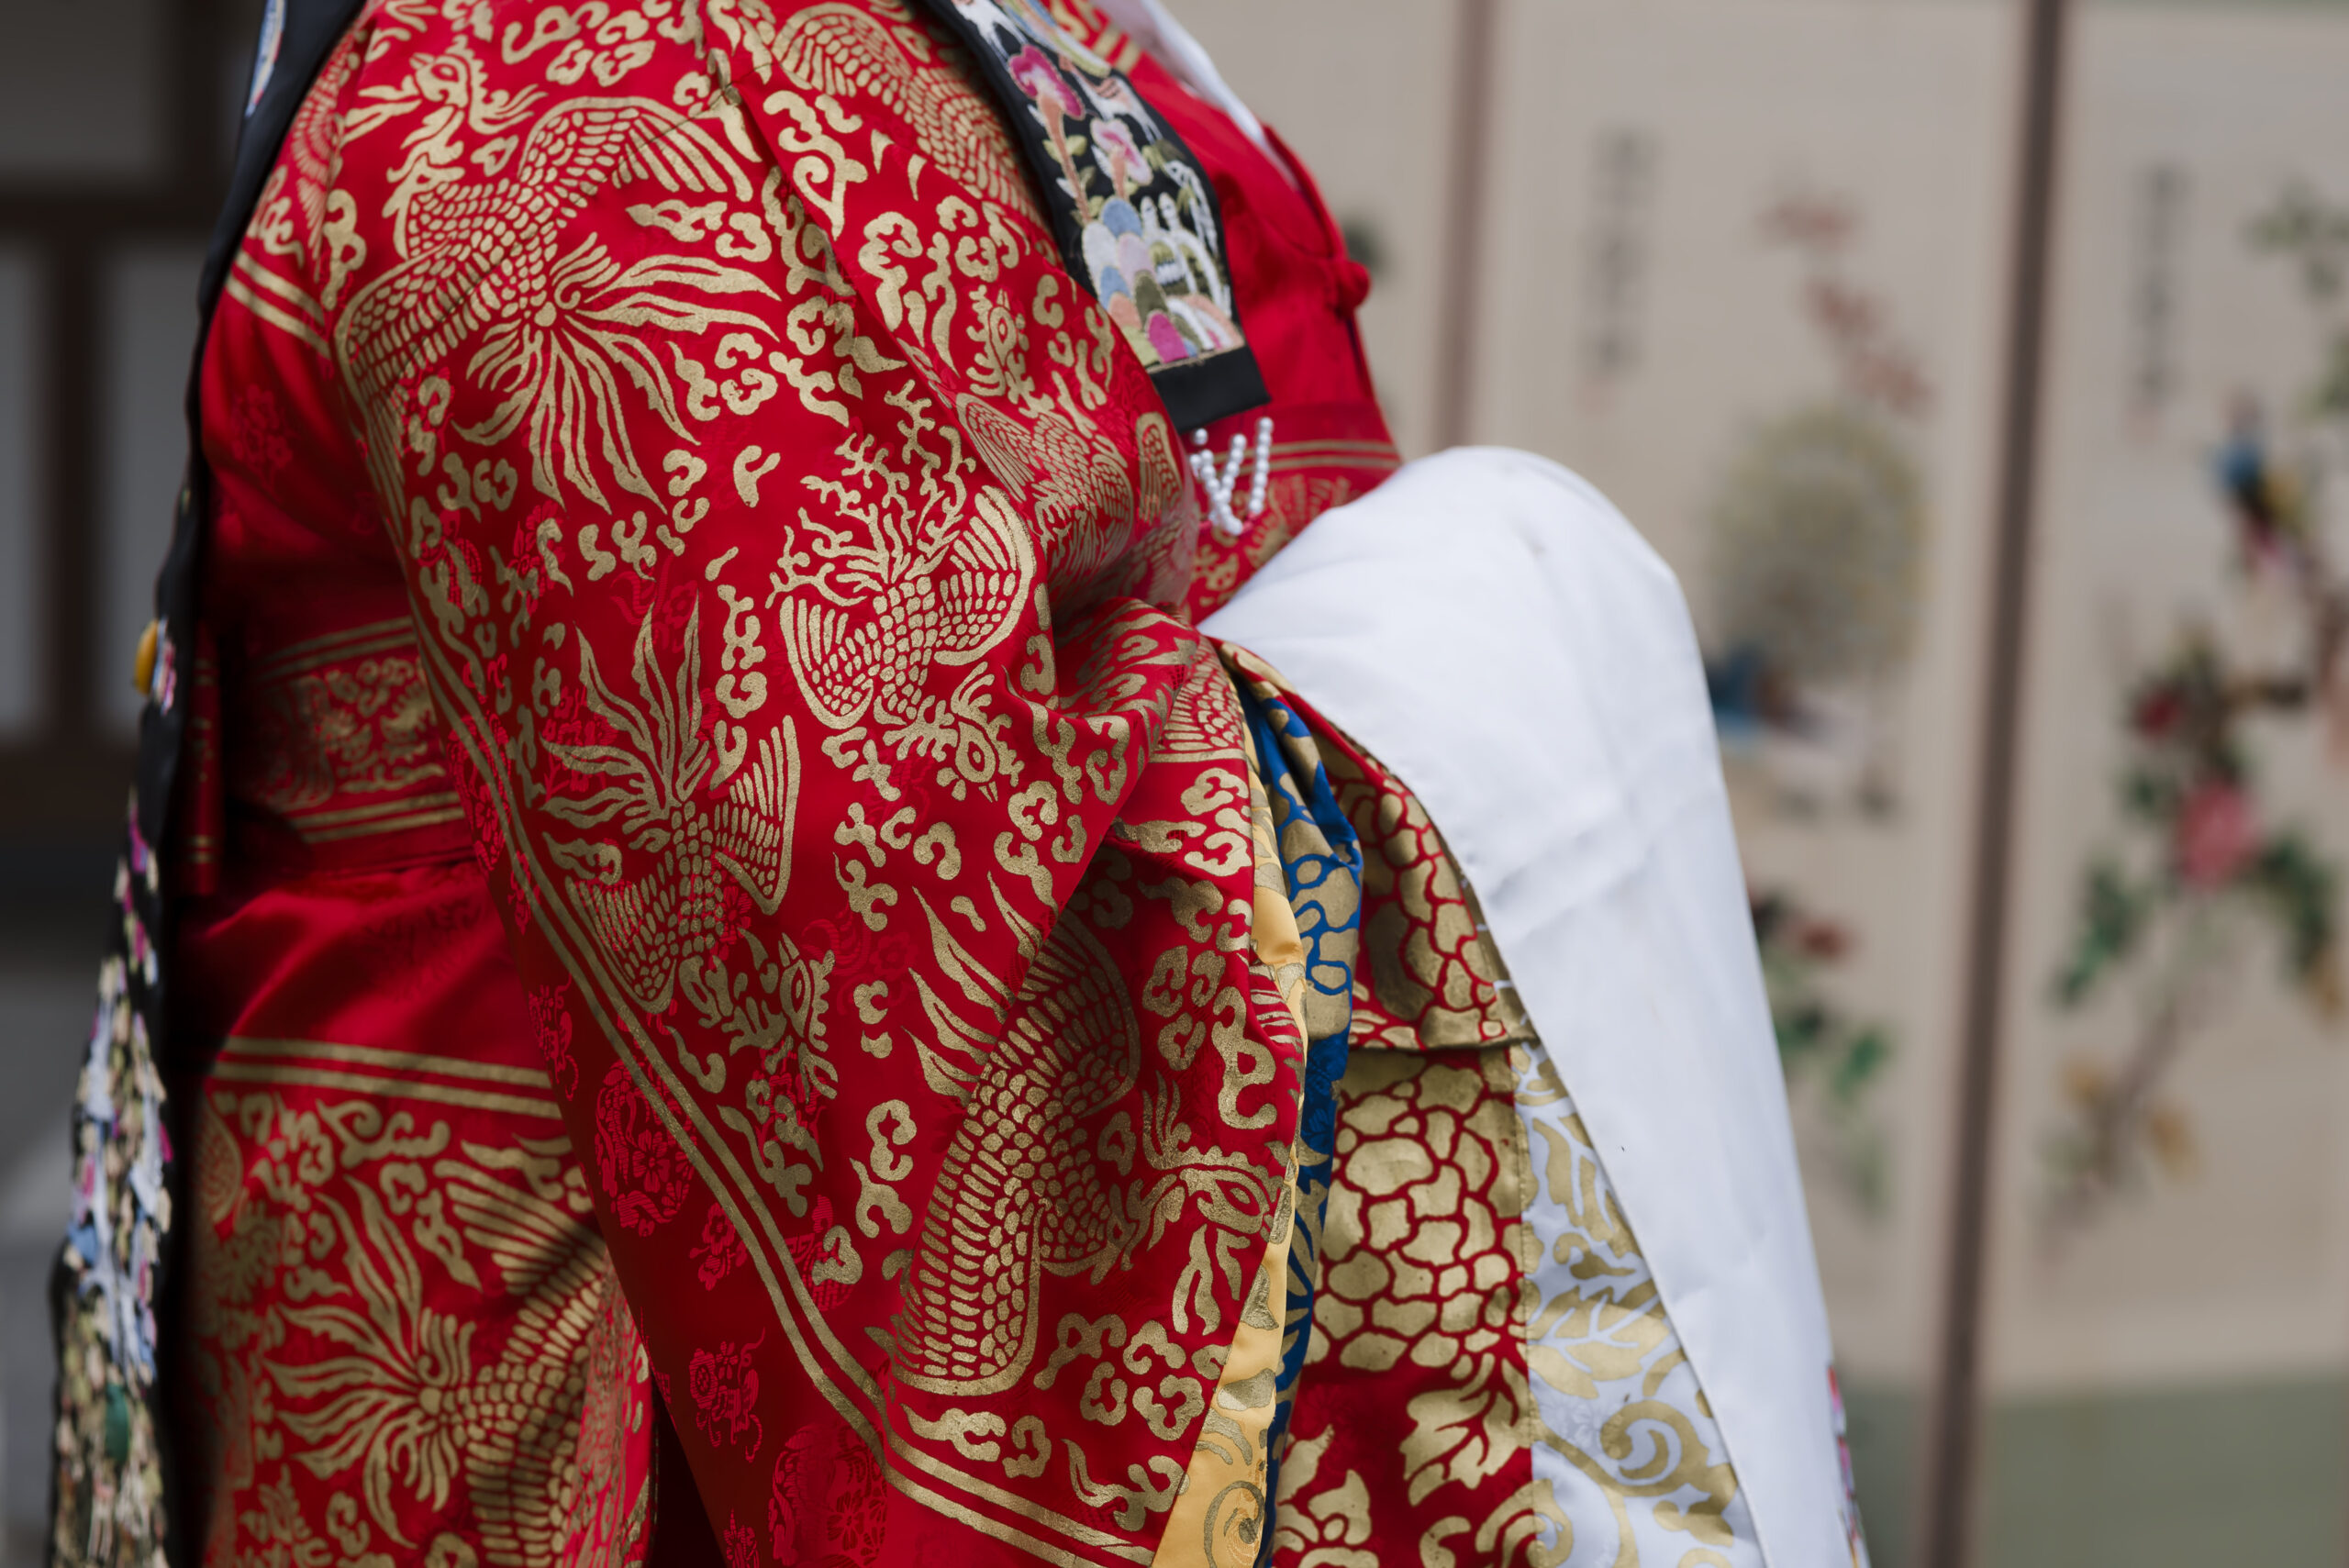 the red and gold hanbok of the bride